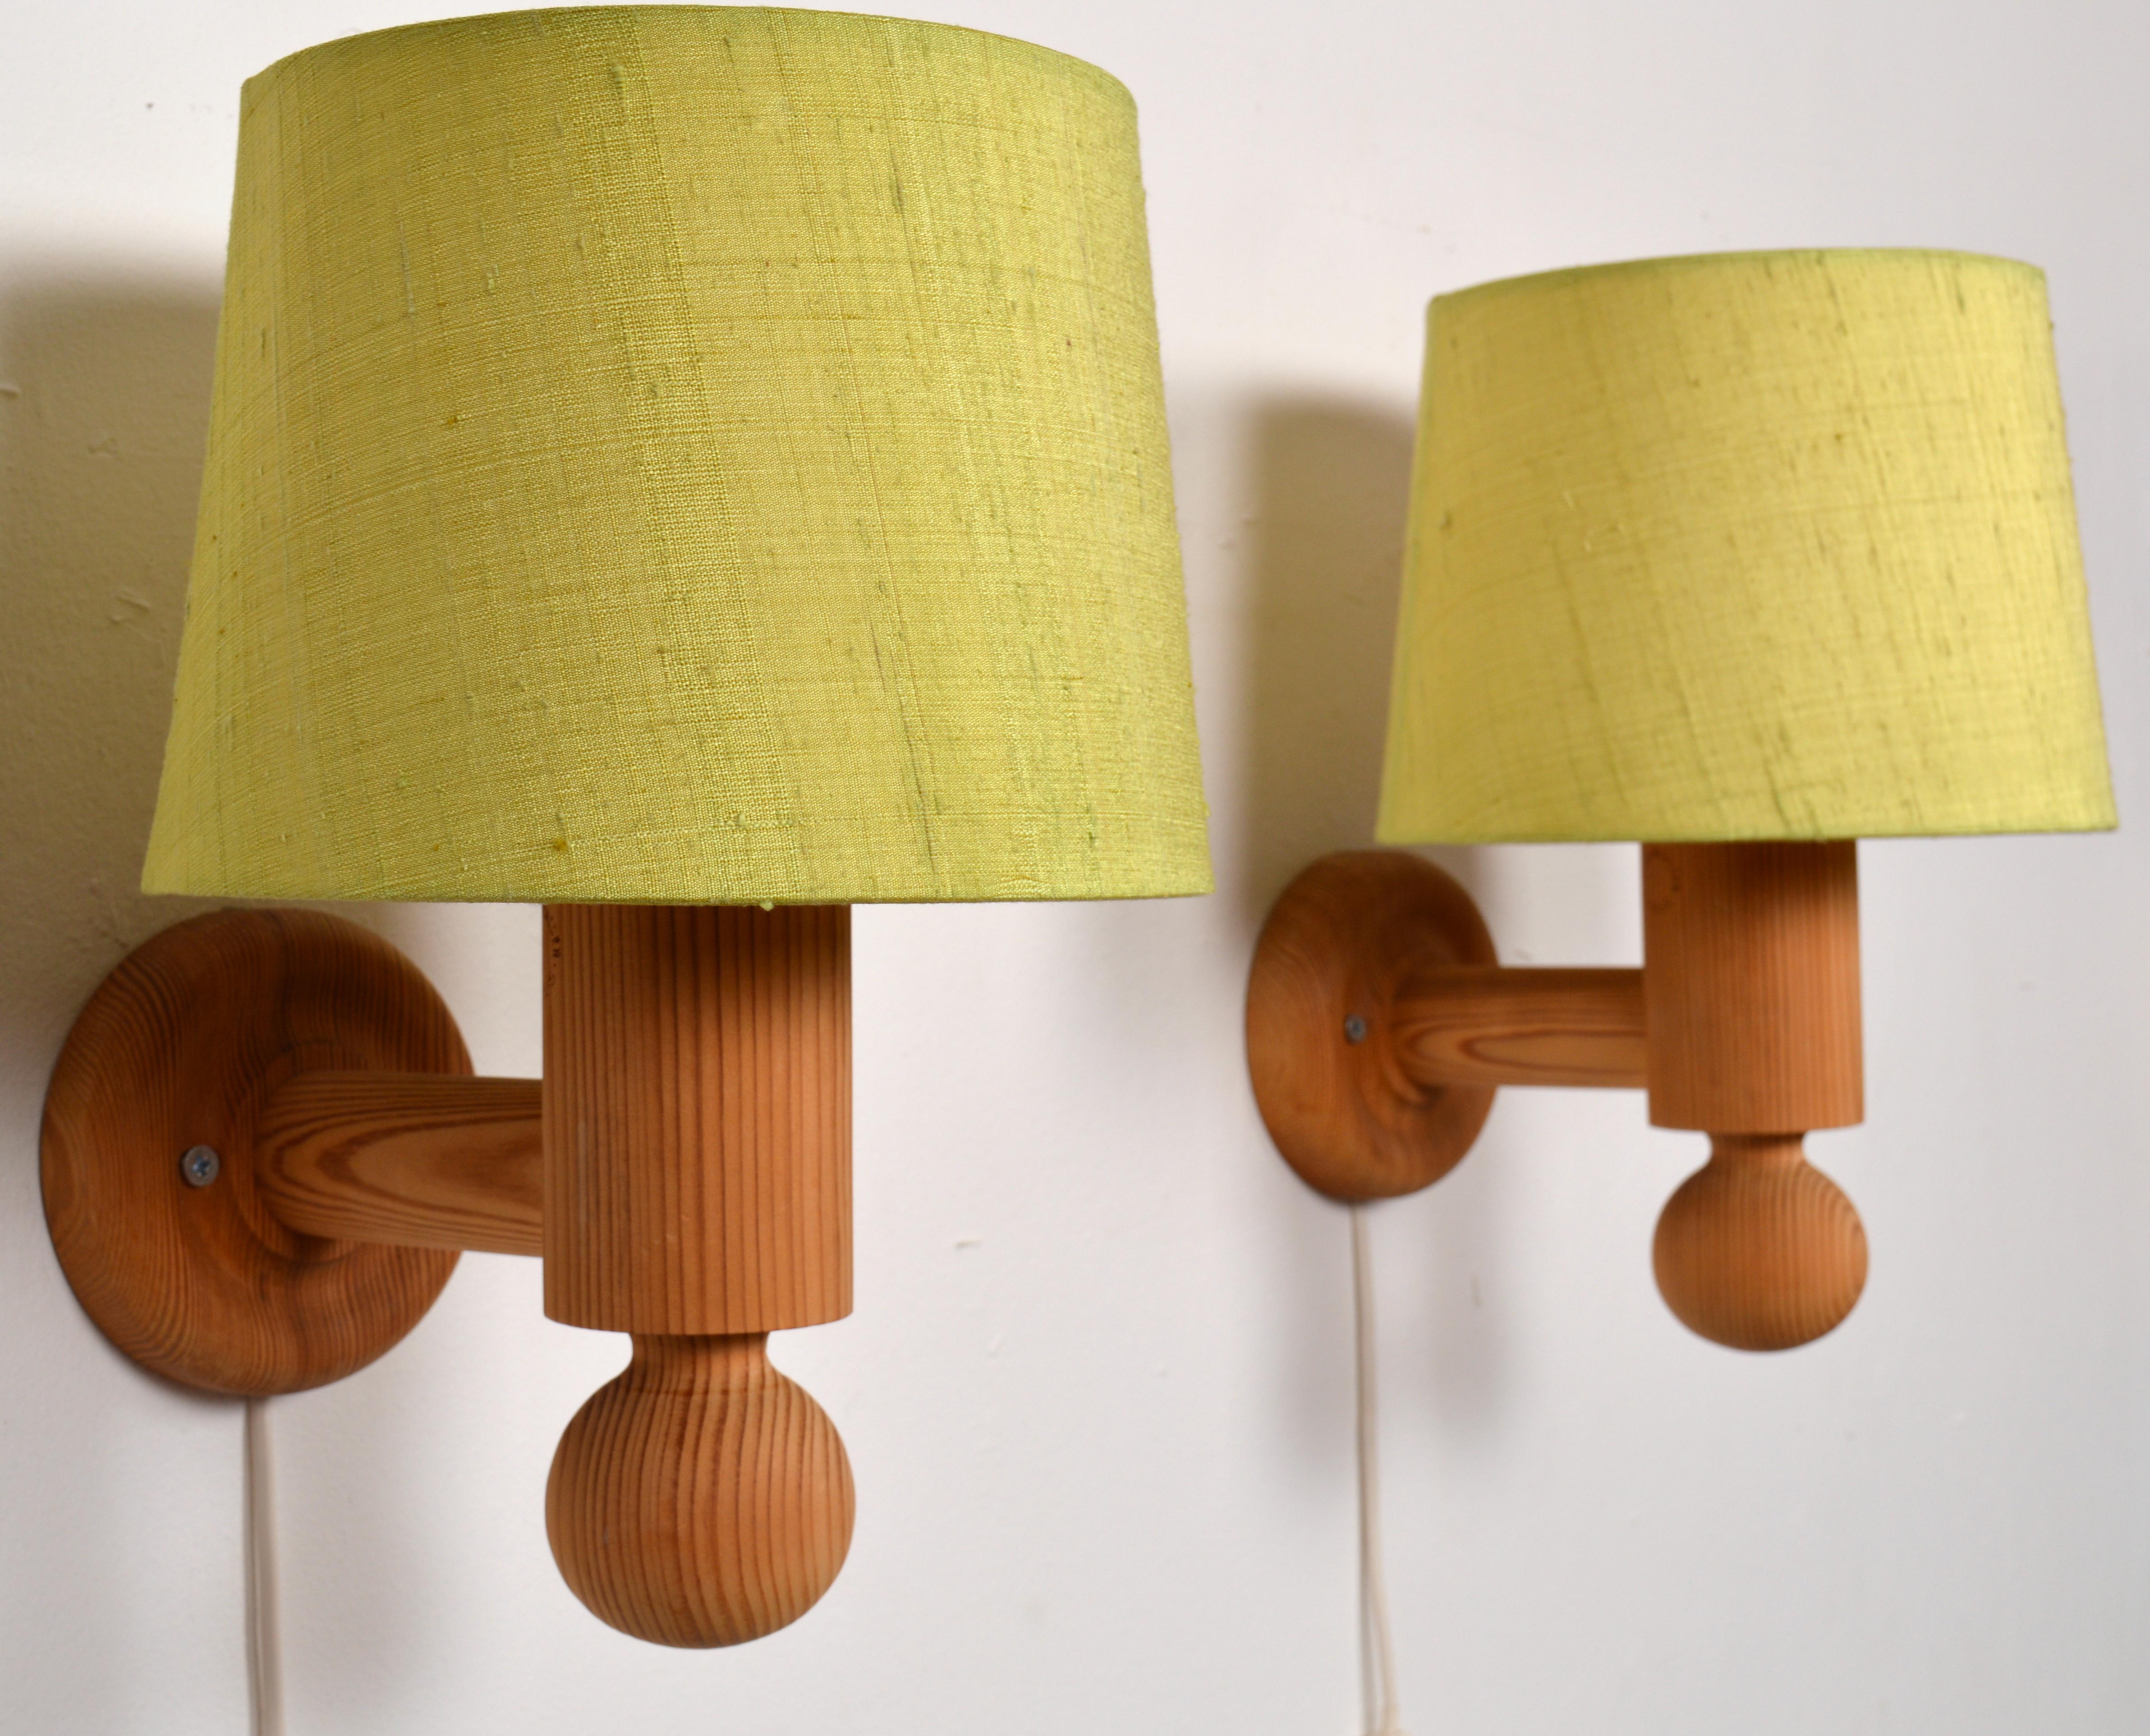 Mid-Century Modern Sconces / Wall Lights in Solid Pine, Luxus Sweden, 1960s For Sale